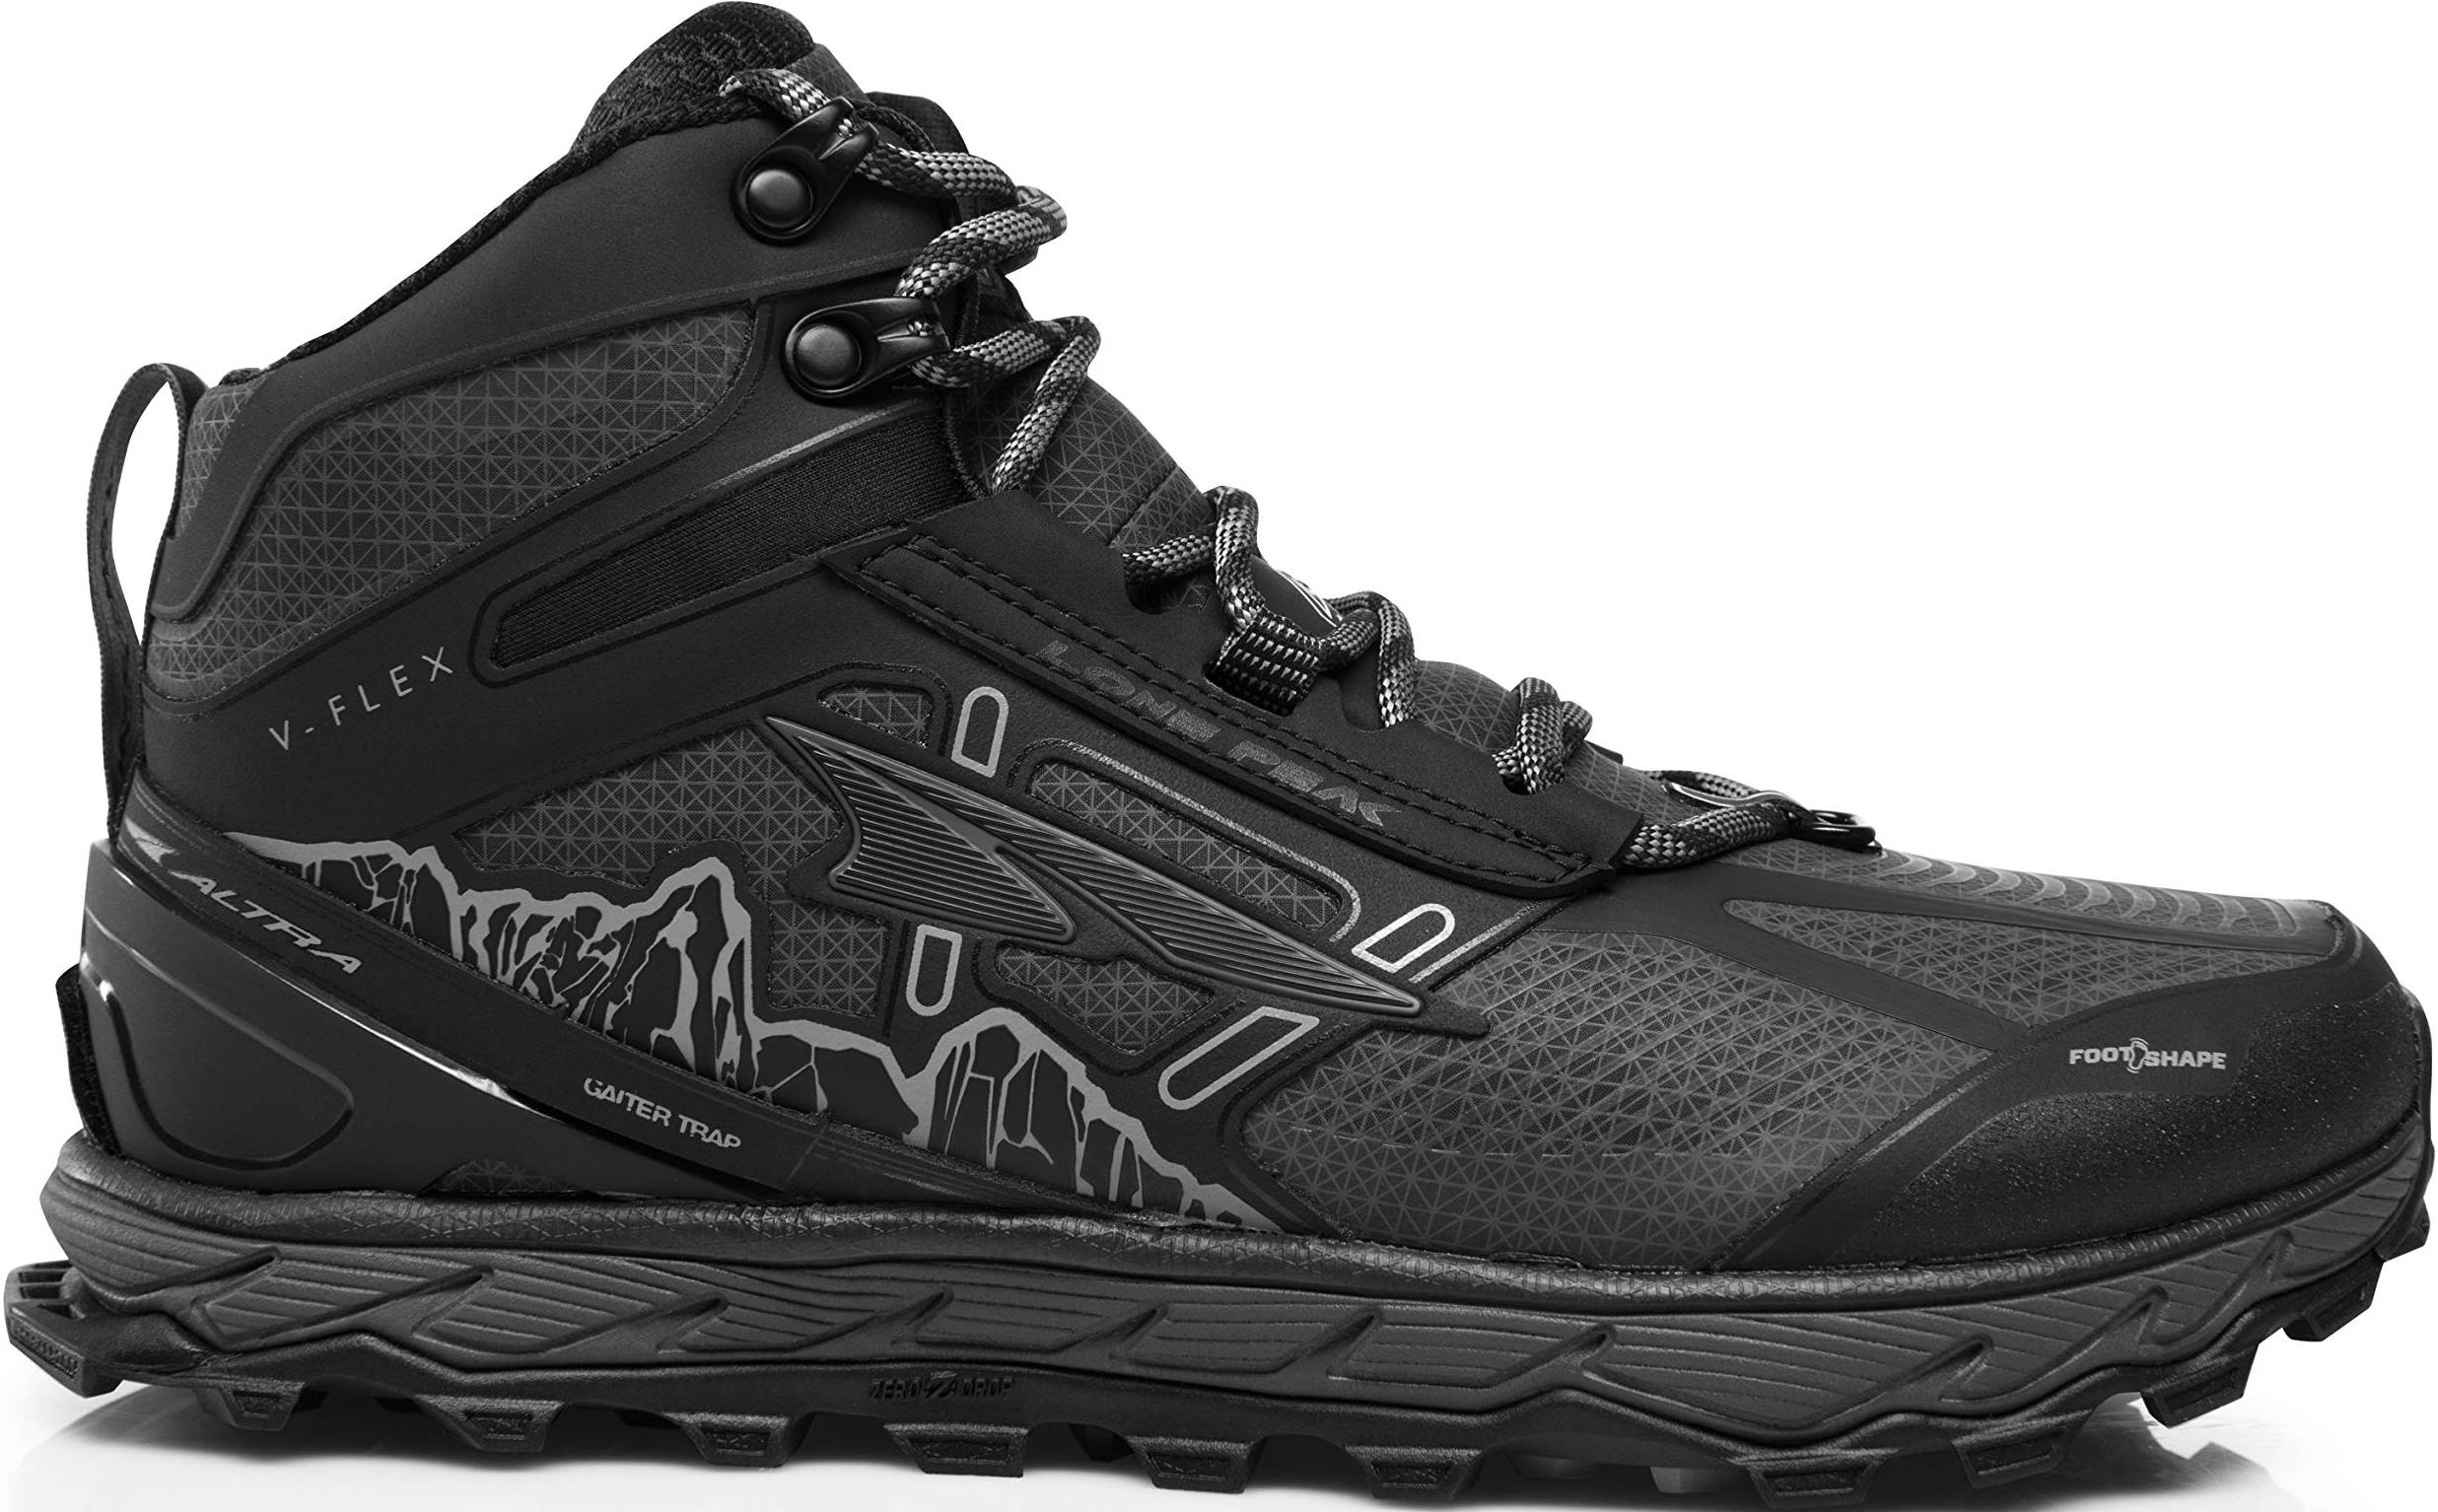 Save 40% on Waterproof Running Shoes 